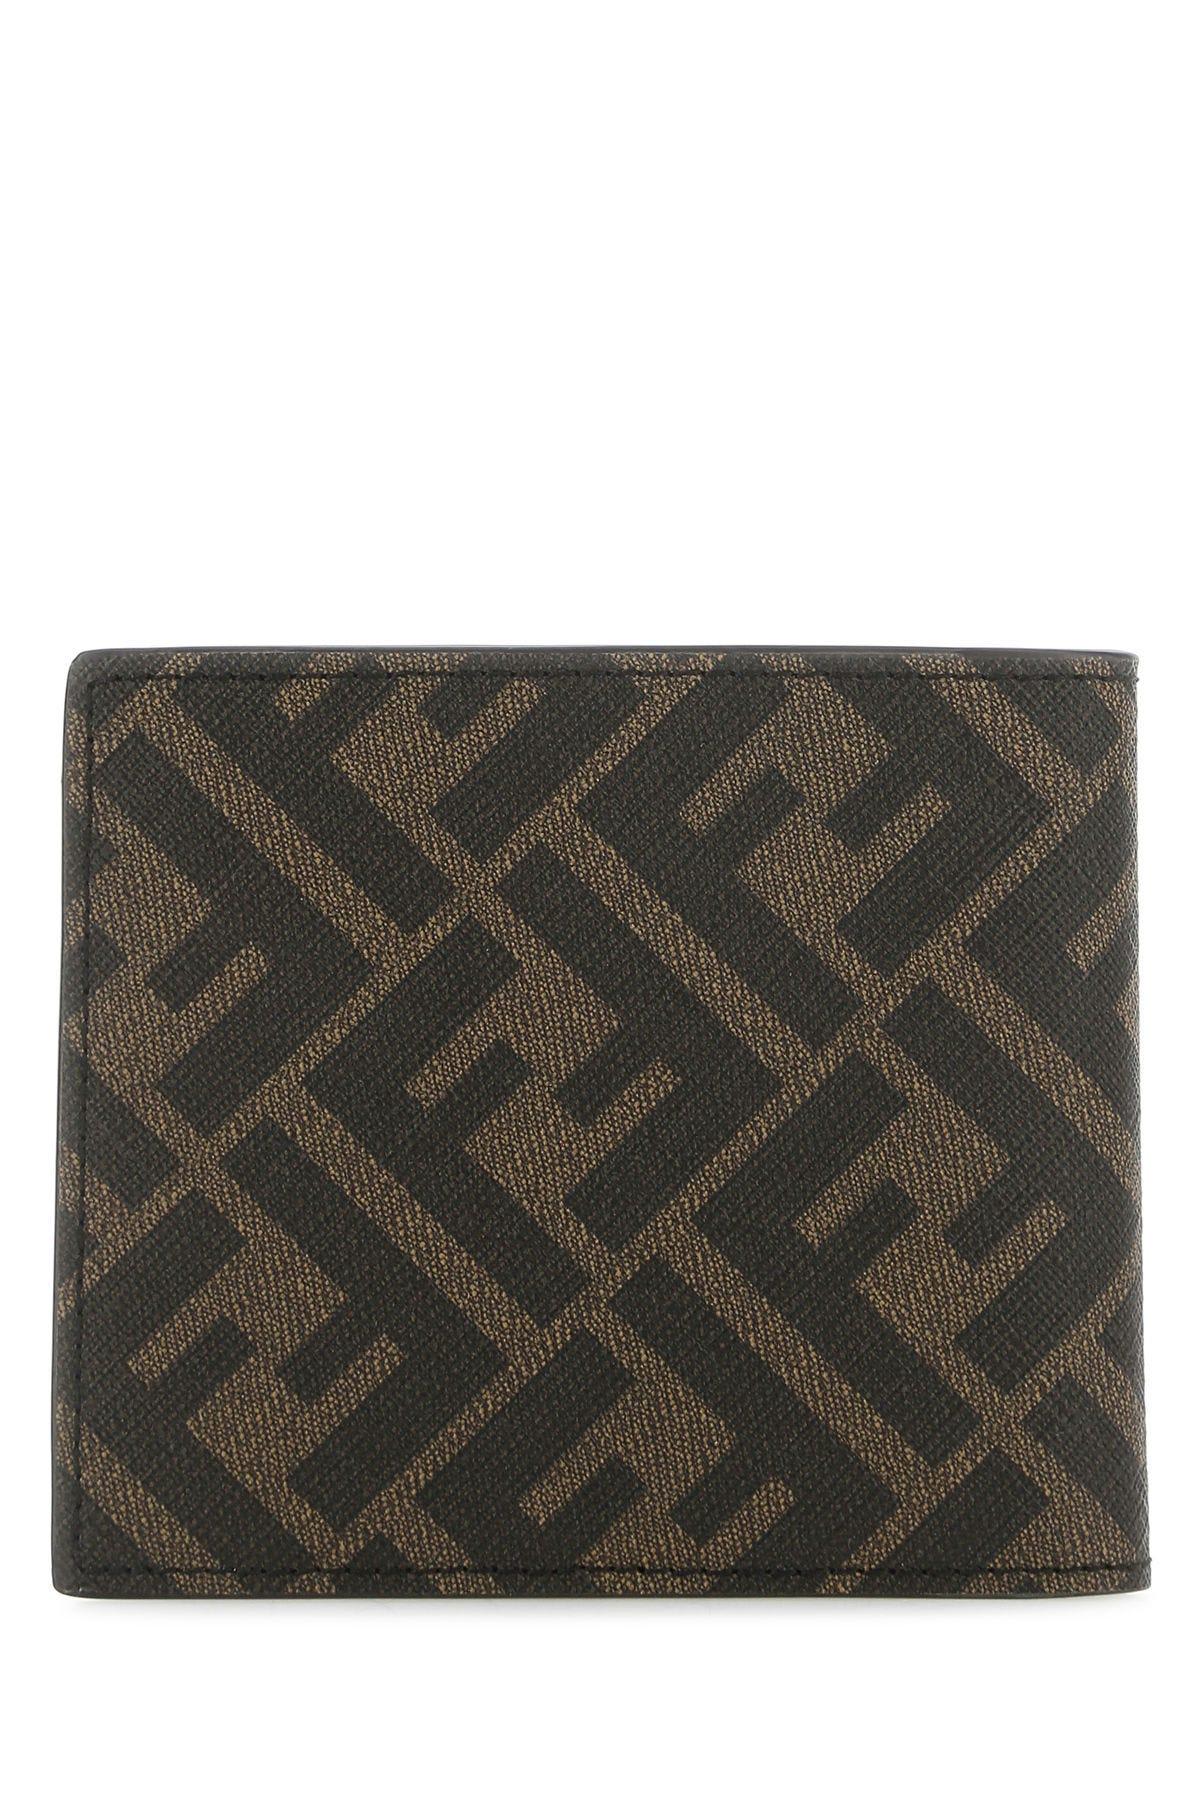 Shop Fendi Multicolor Fabric And Leather Wallet In Tab.mt+sand+nero